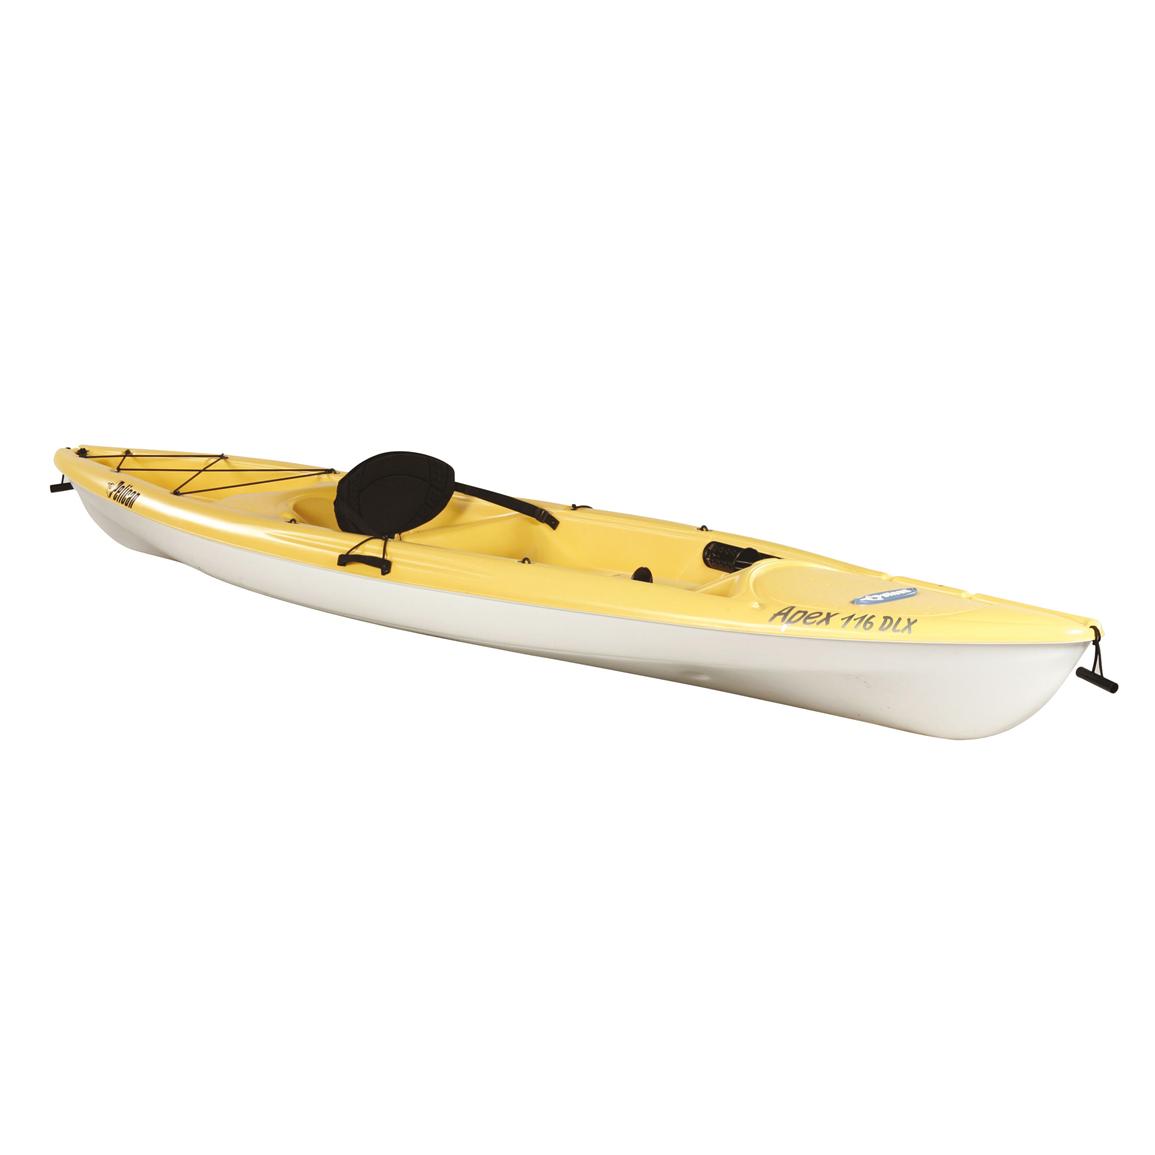 PelicanÂ® Apexâ„¢ 116 Deluxe Kayak with Paddle - 124668 